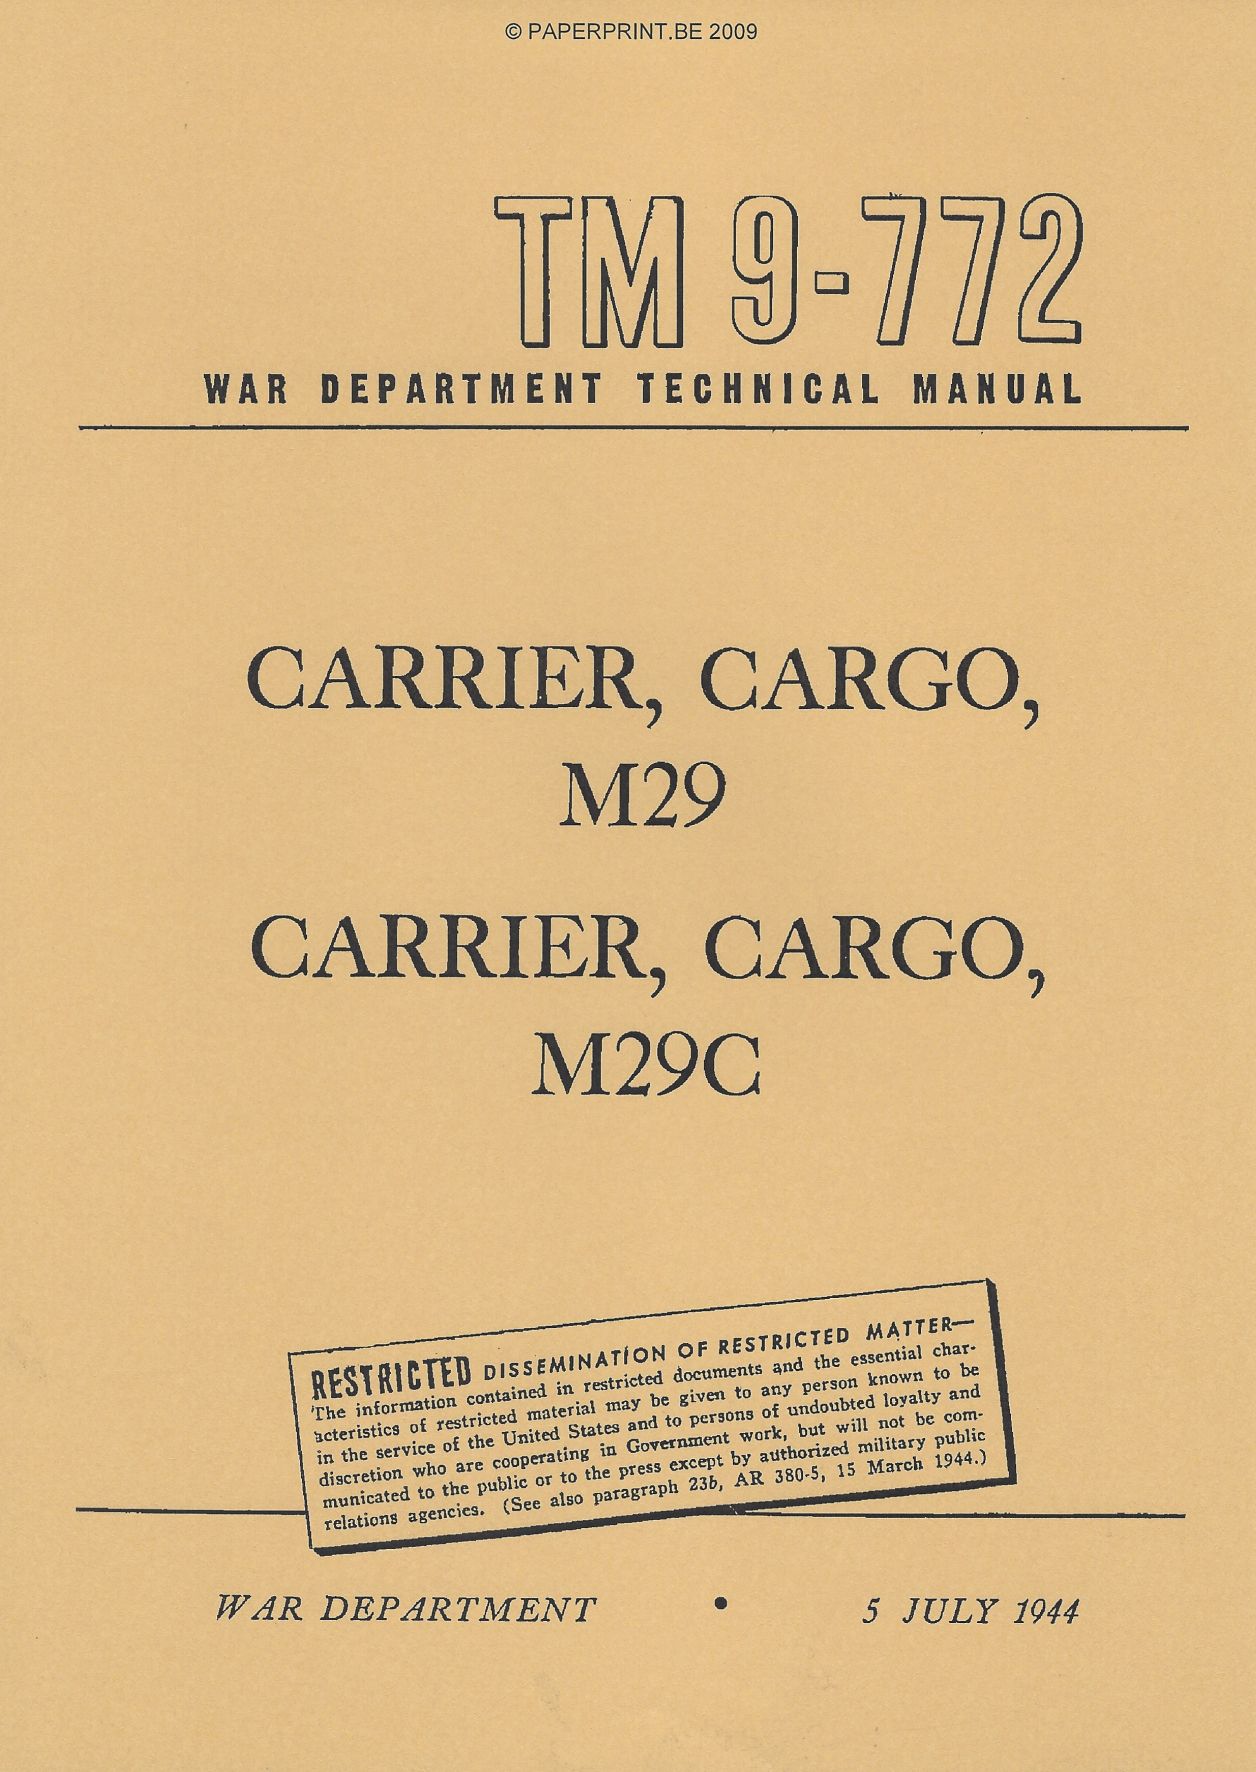 TM 9-772 US CARRIER, CARGO, M29 AND M29C